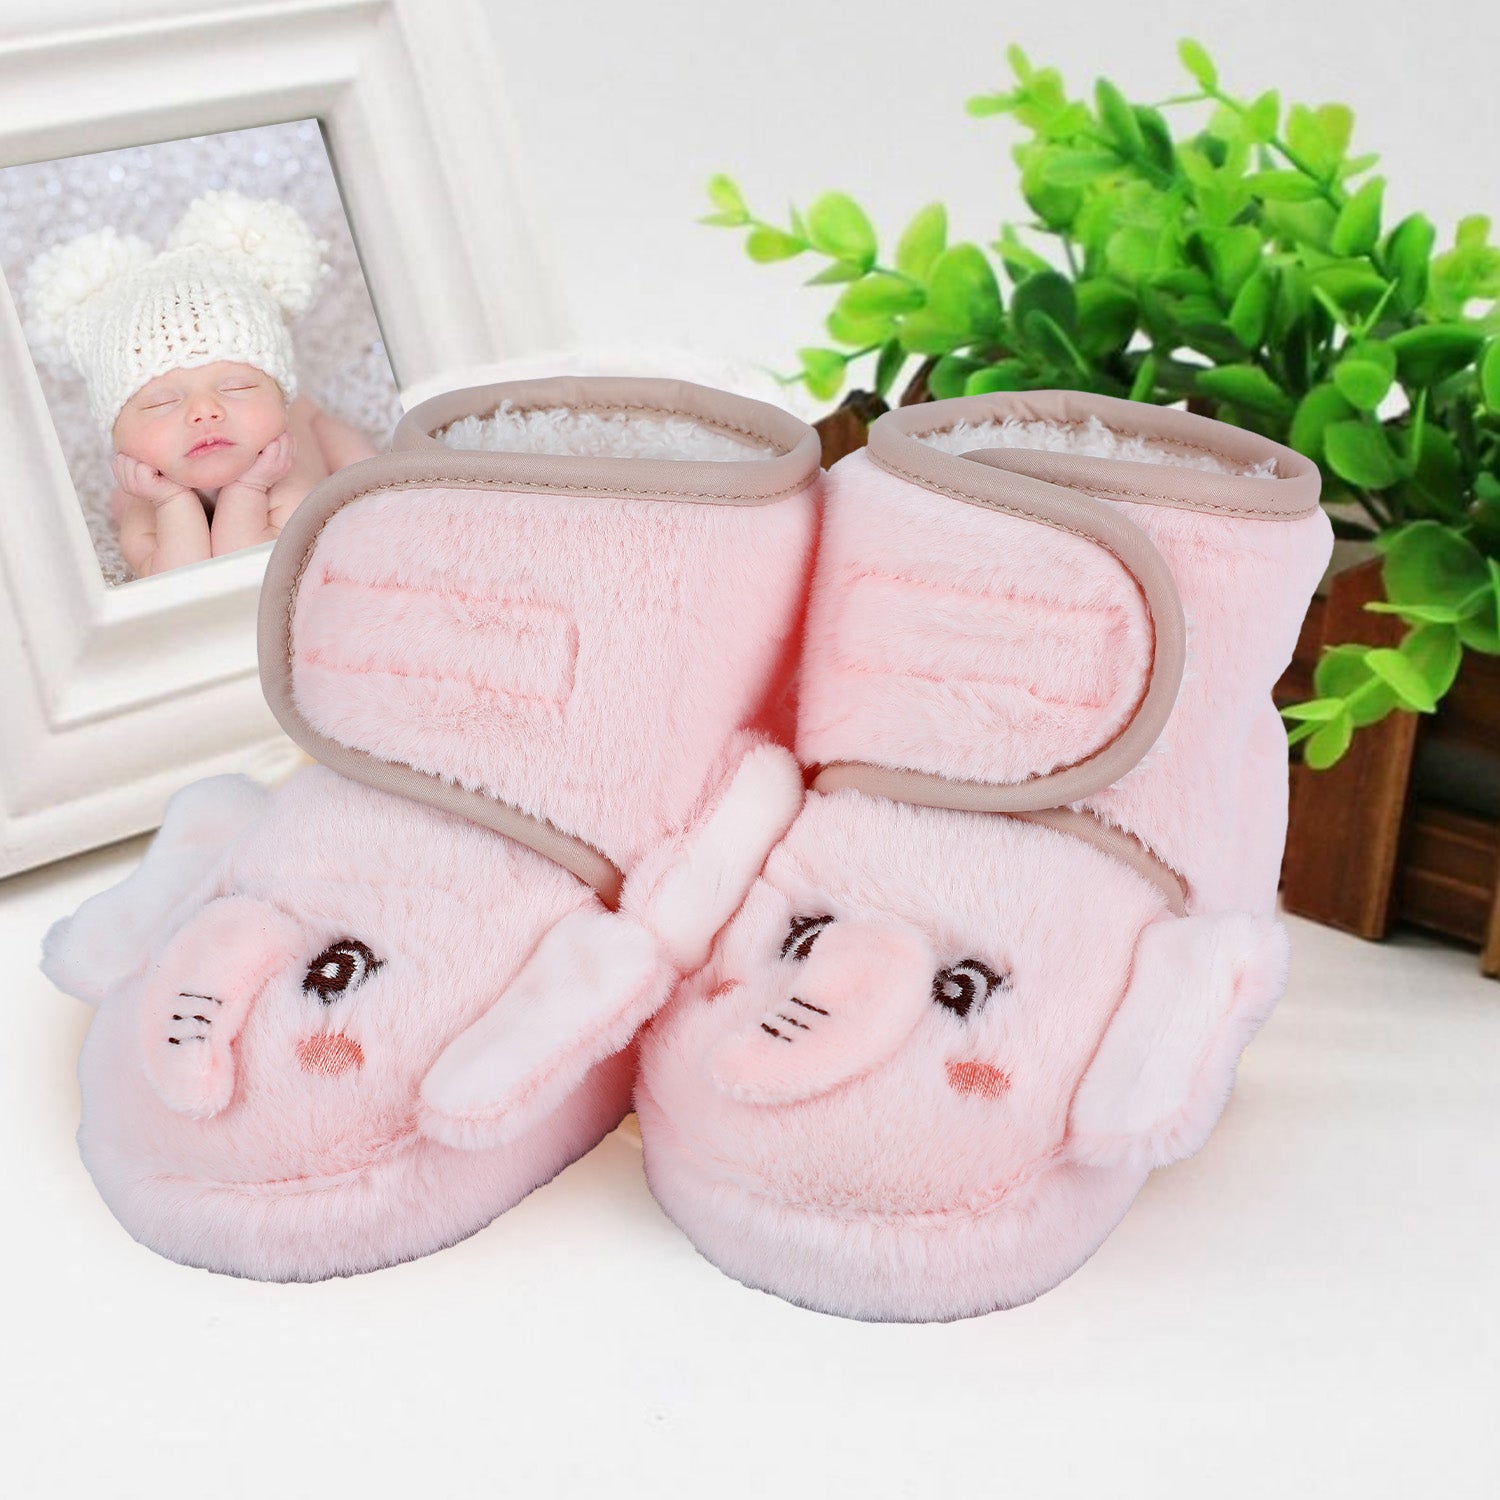 Sadie Baby - Baby Girl Shoes & Clothing Store